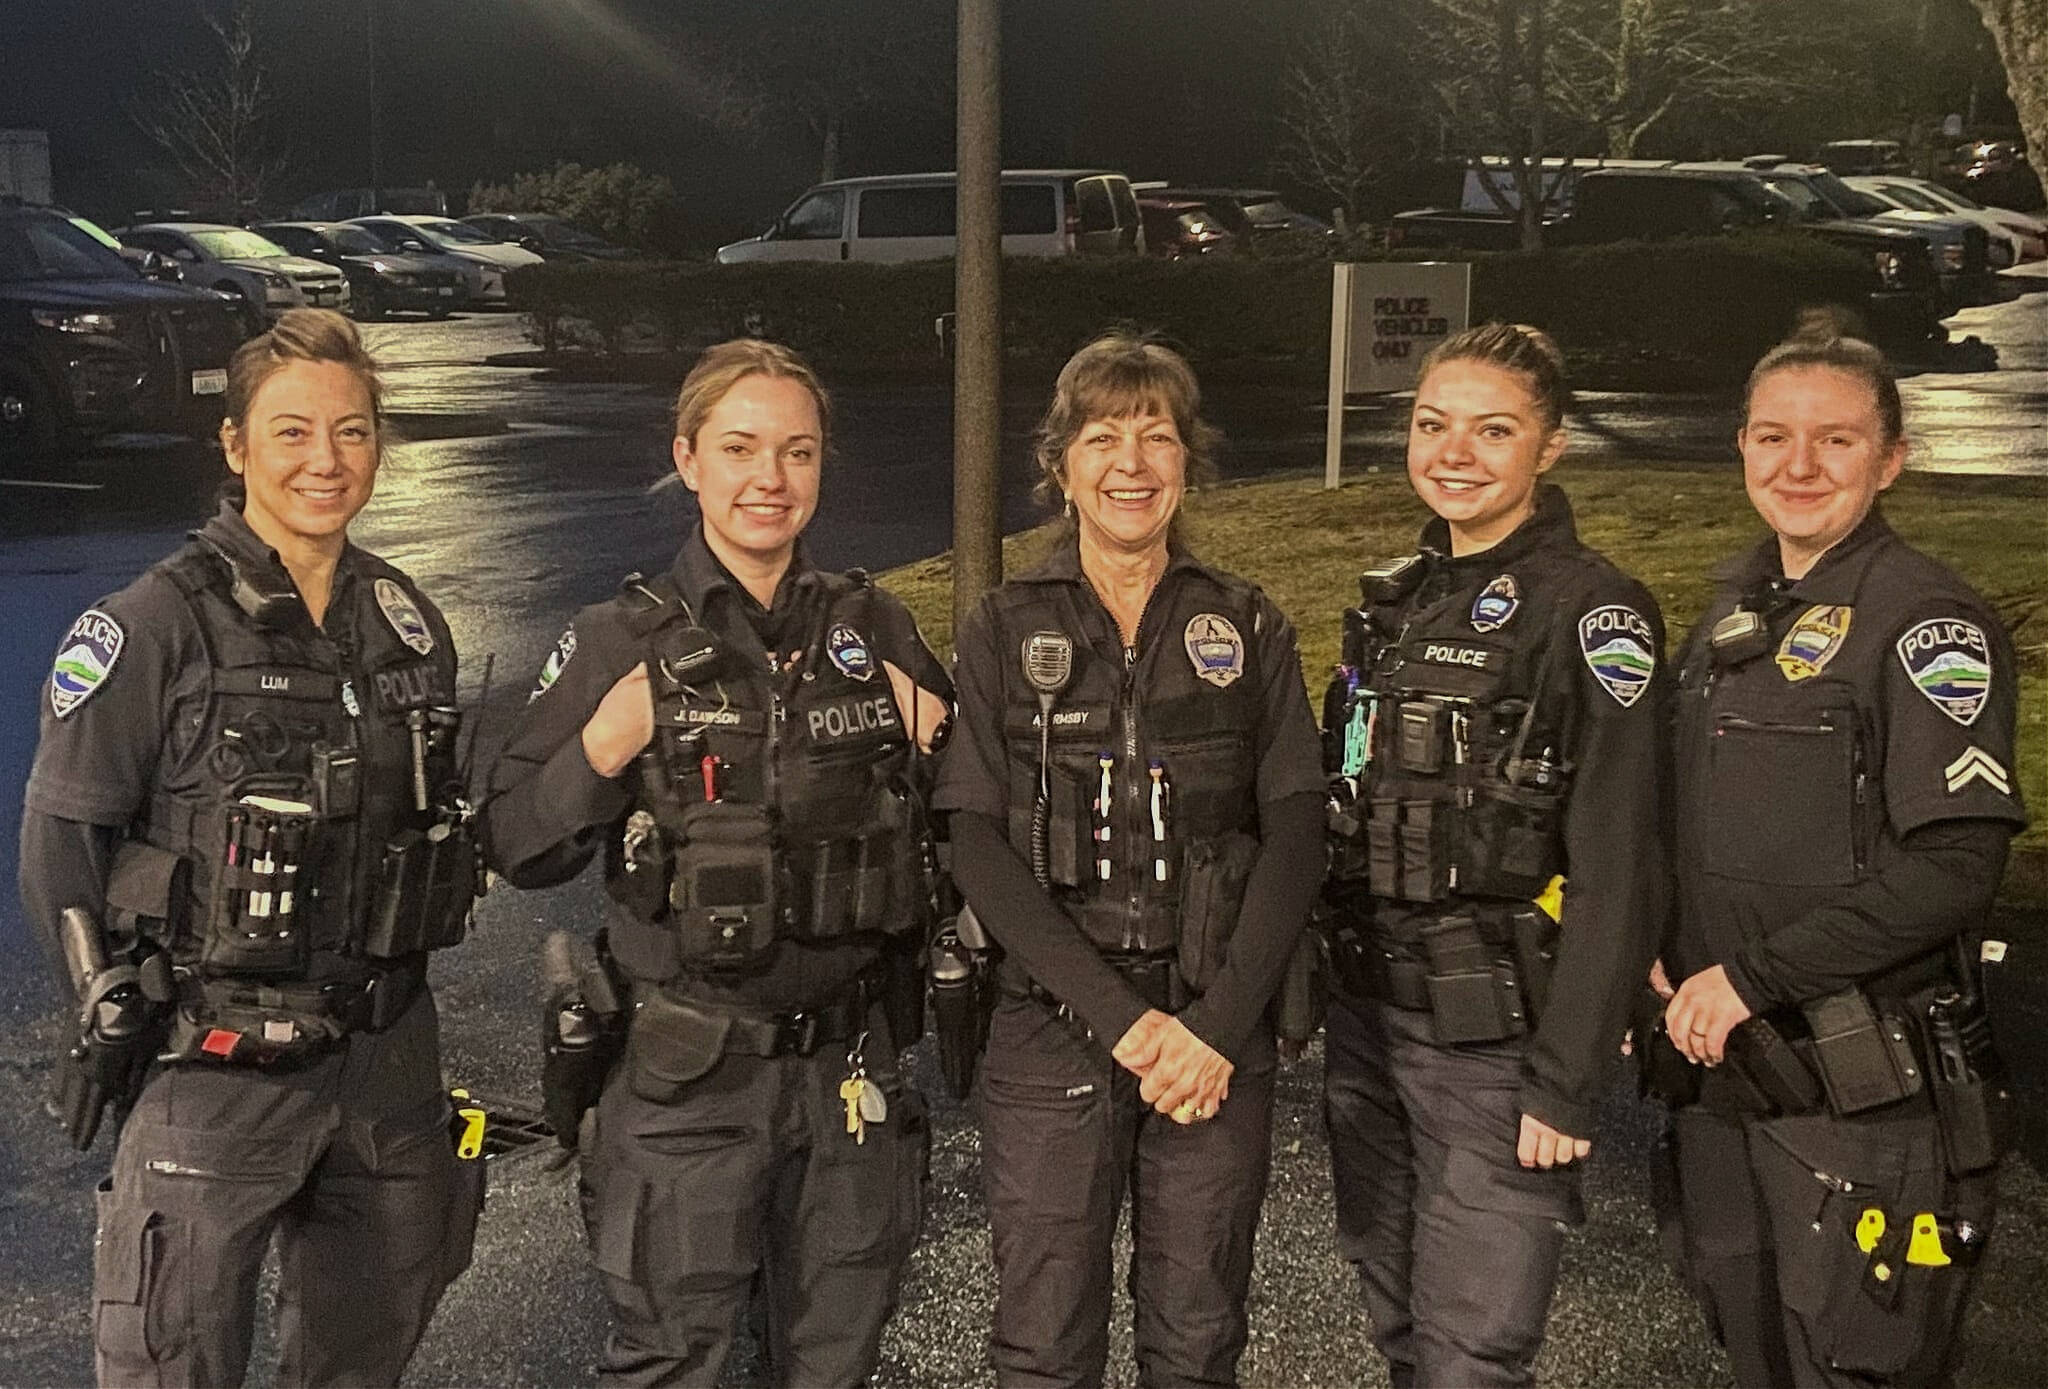 Mercer Island Police Department officers pictured from left to right: Kristina Lum, Jacqueline Dawson, Anna Ormsby, Olivia Jensen and corporal Samantha Hammer. Photo courtesy of the Mercer Island Police Department